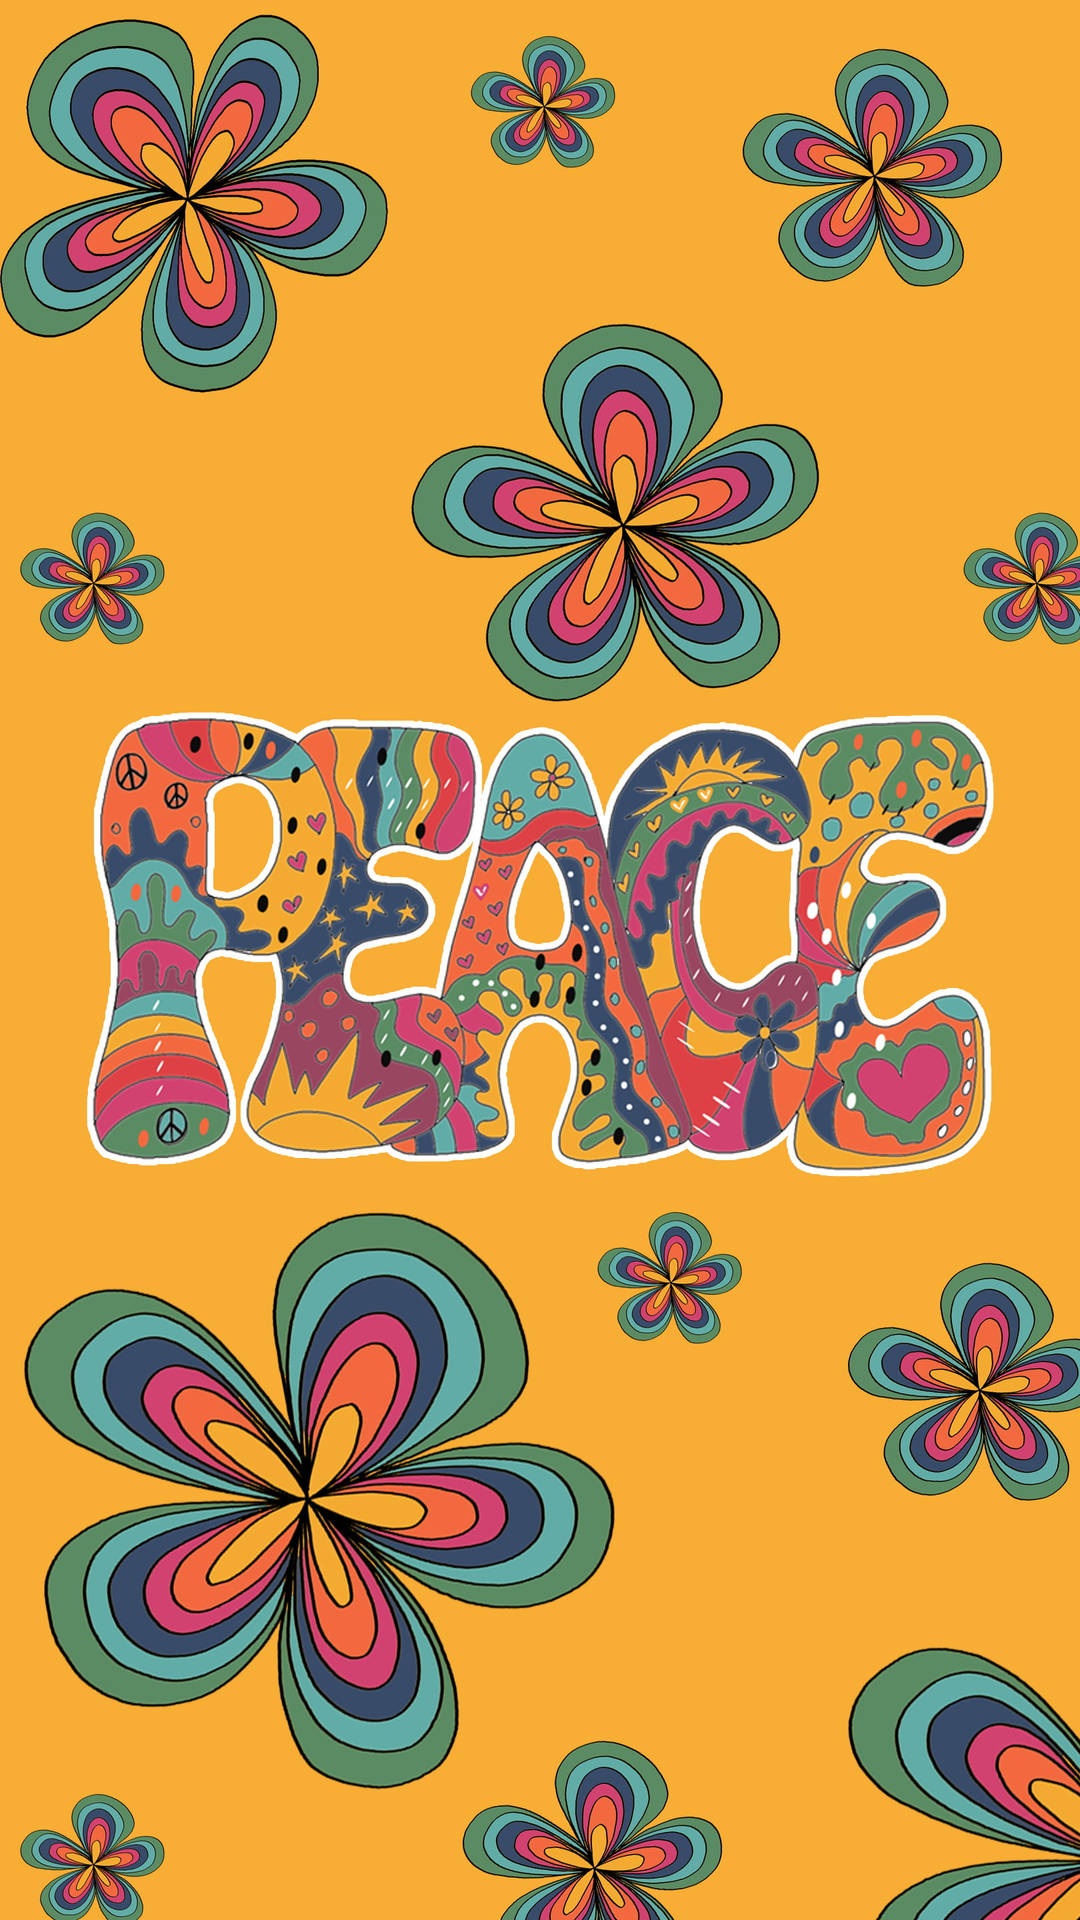 Groovy Peace Sign 70s Retro Aesthetic Wallpaper